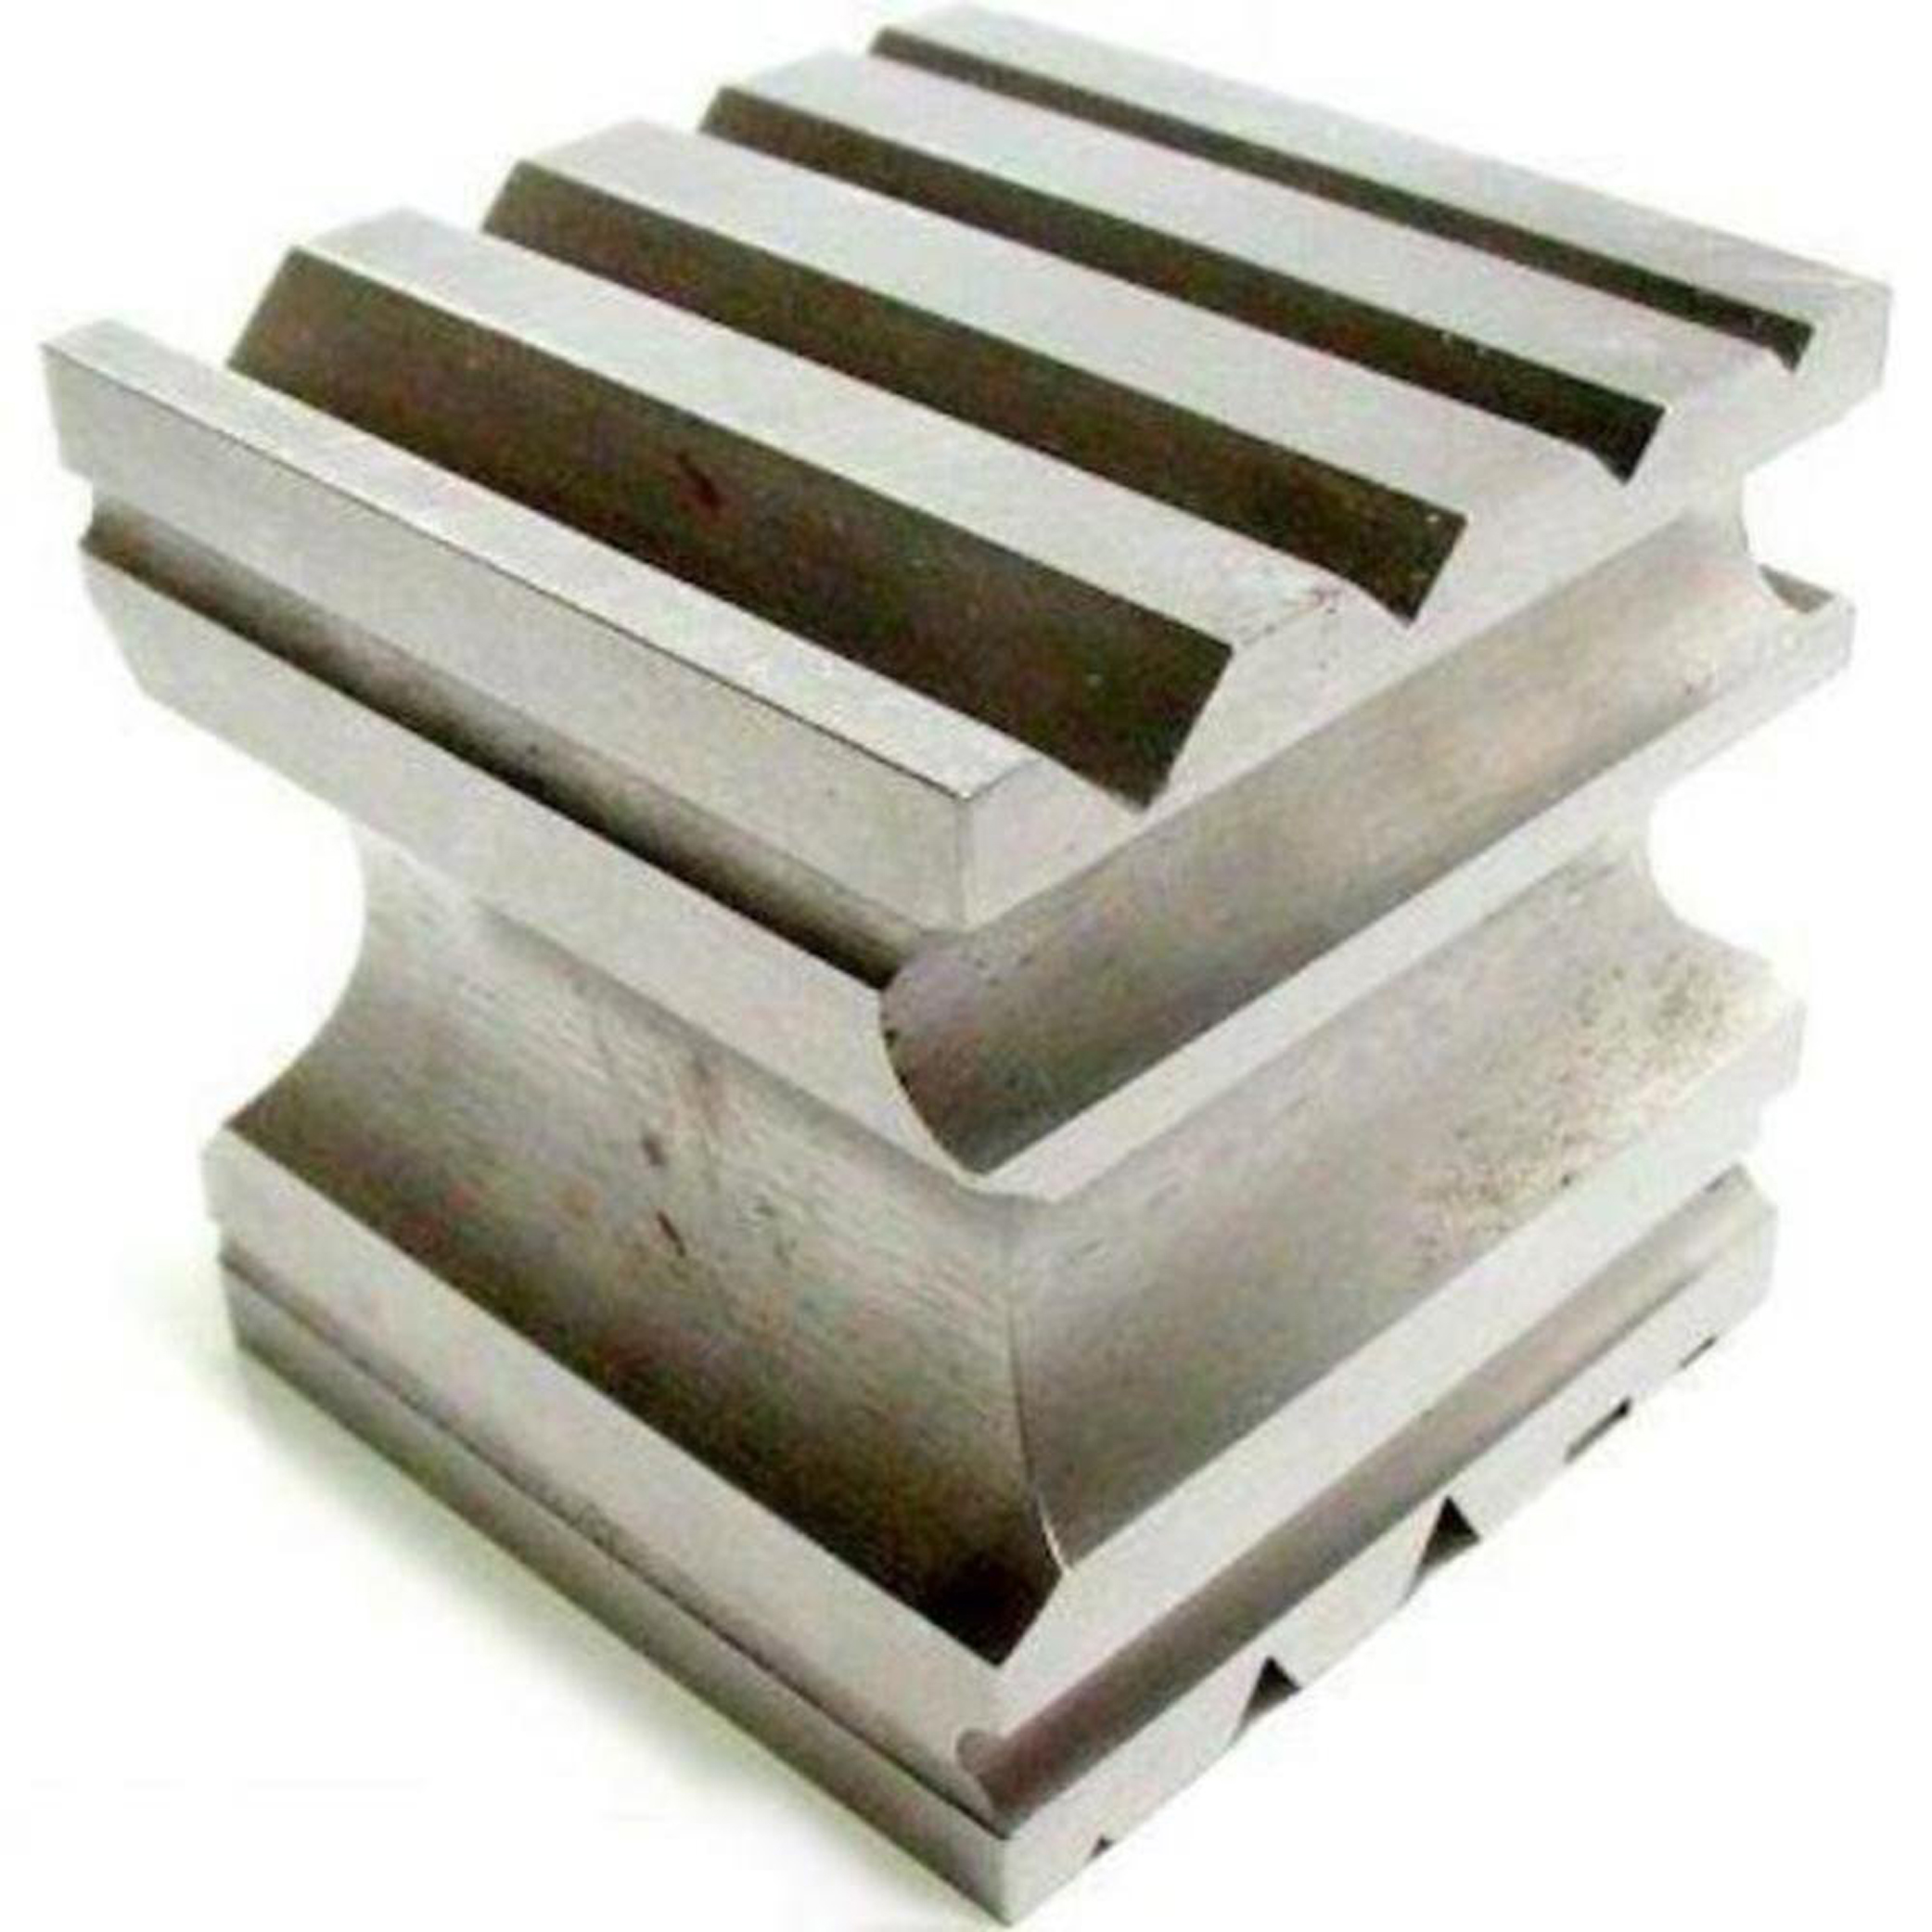 SWAGE BLOCK, 2.5" Made of solid steel for bending and shaping